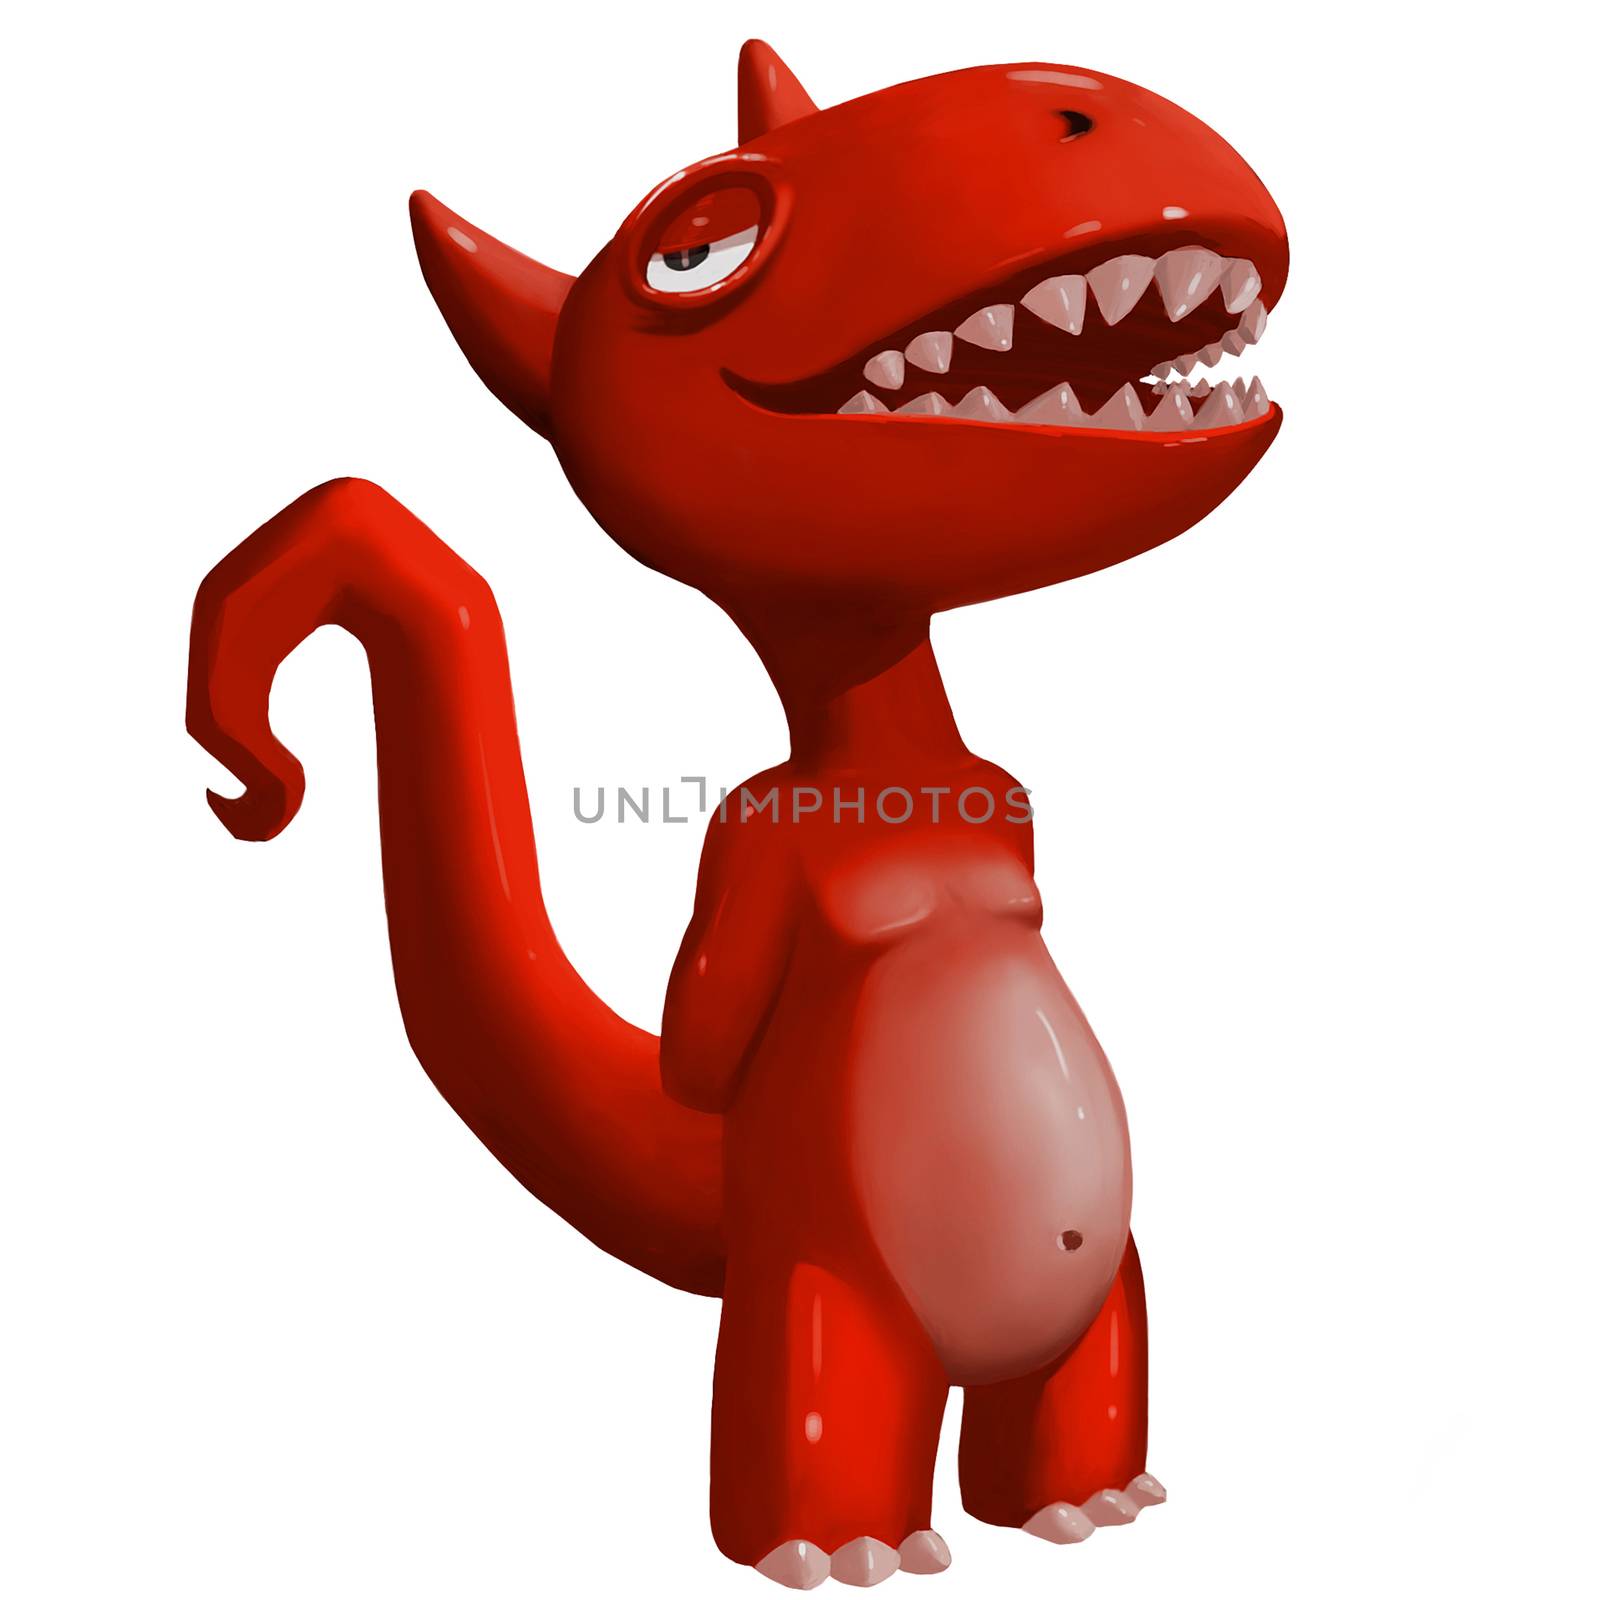 Illustration: Mr.N, The Red Dinosaur Man - Monster Camp Topic. Element / Character Design - Fantastic / Cartoon / Sci-Fi Style